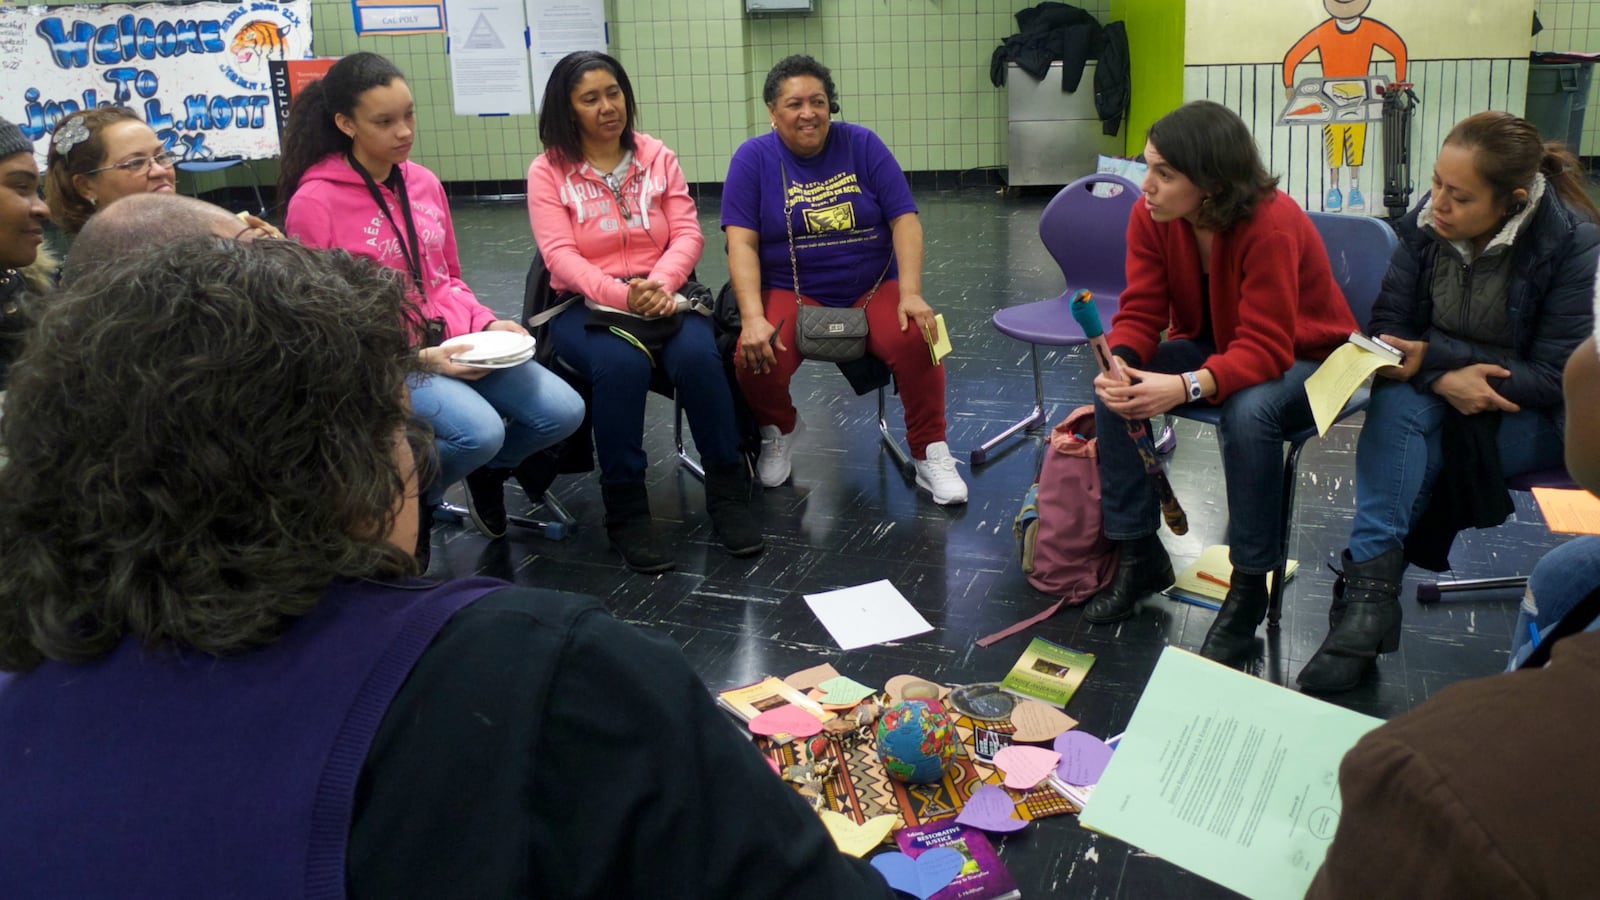 At the event Monday, students and educators learned about “restorative circles,” a method of resolving conflicts by having both sides discuss the issue in a group.